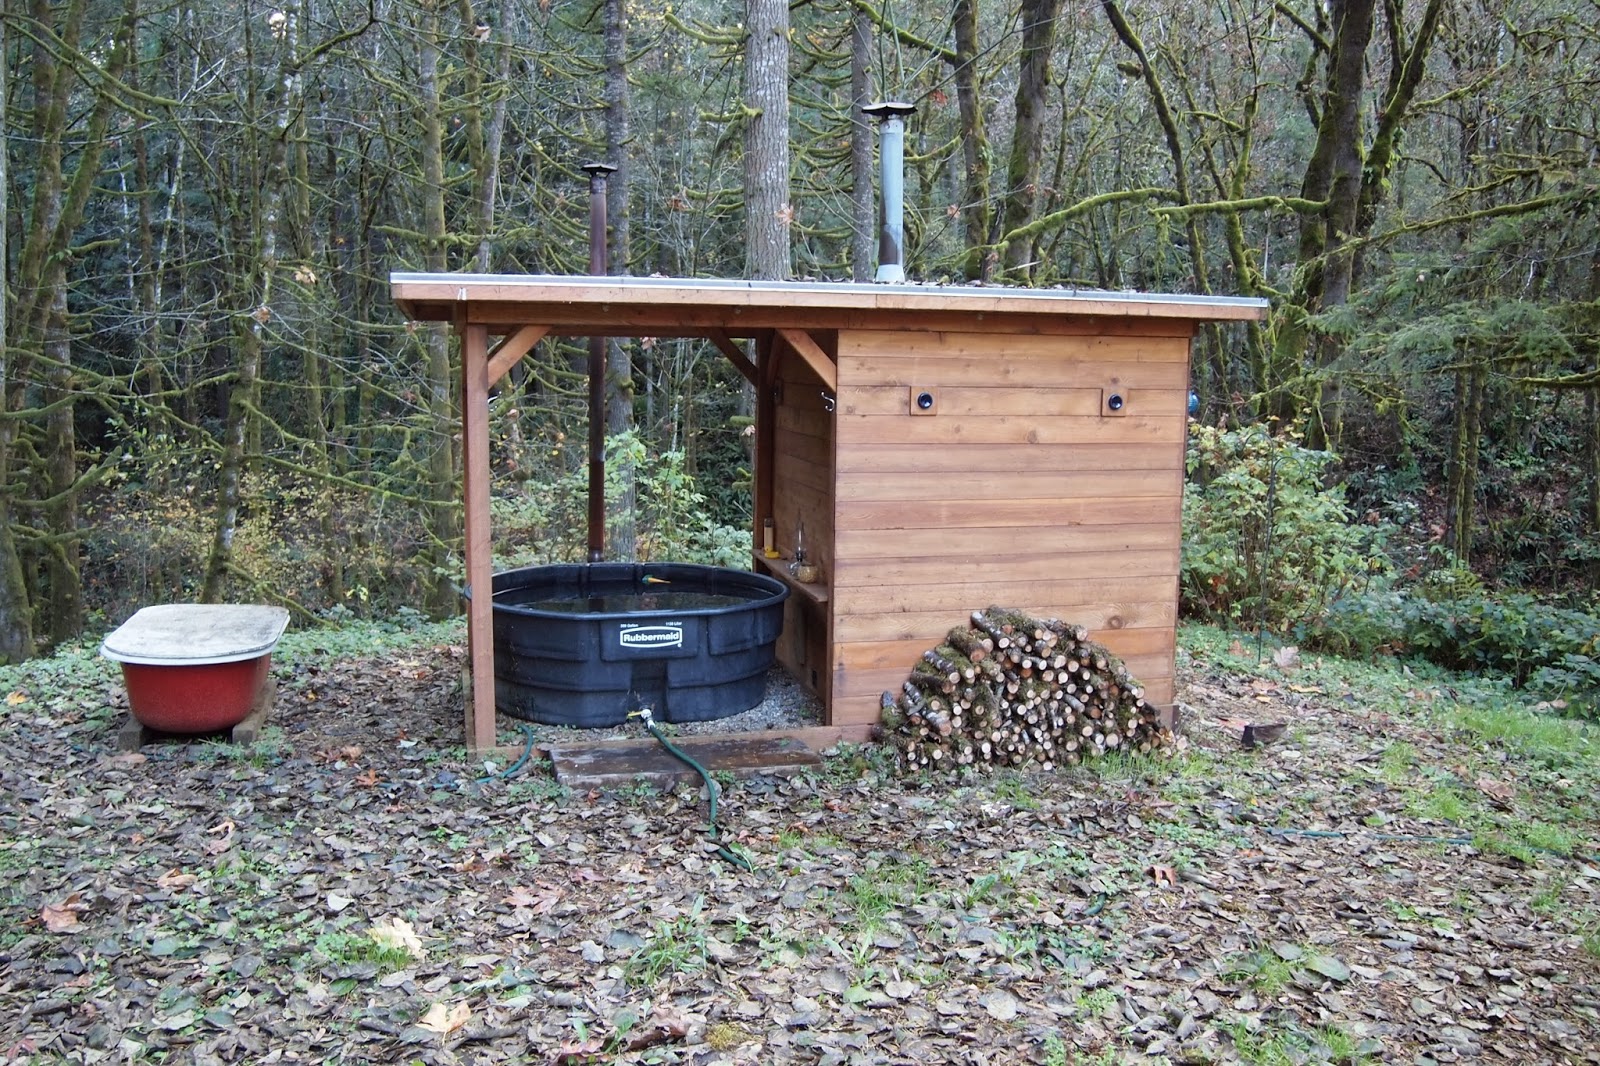  Doug and Erin's wood-fired hot tub revised, now with sauna